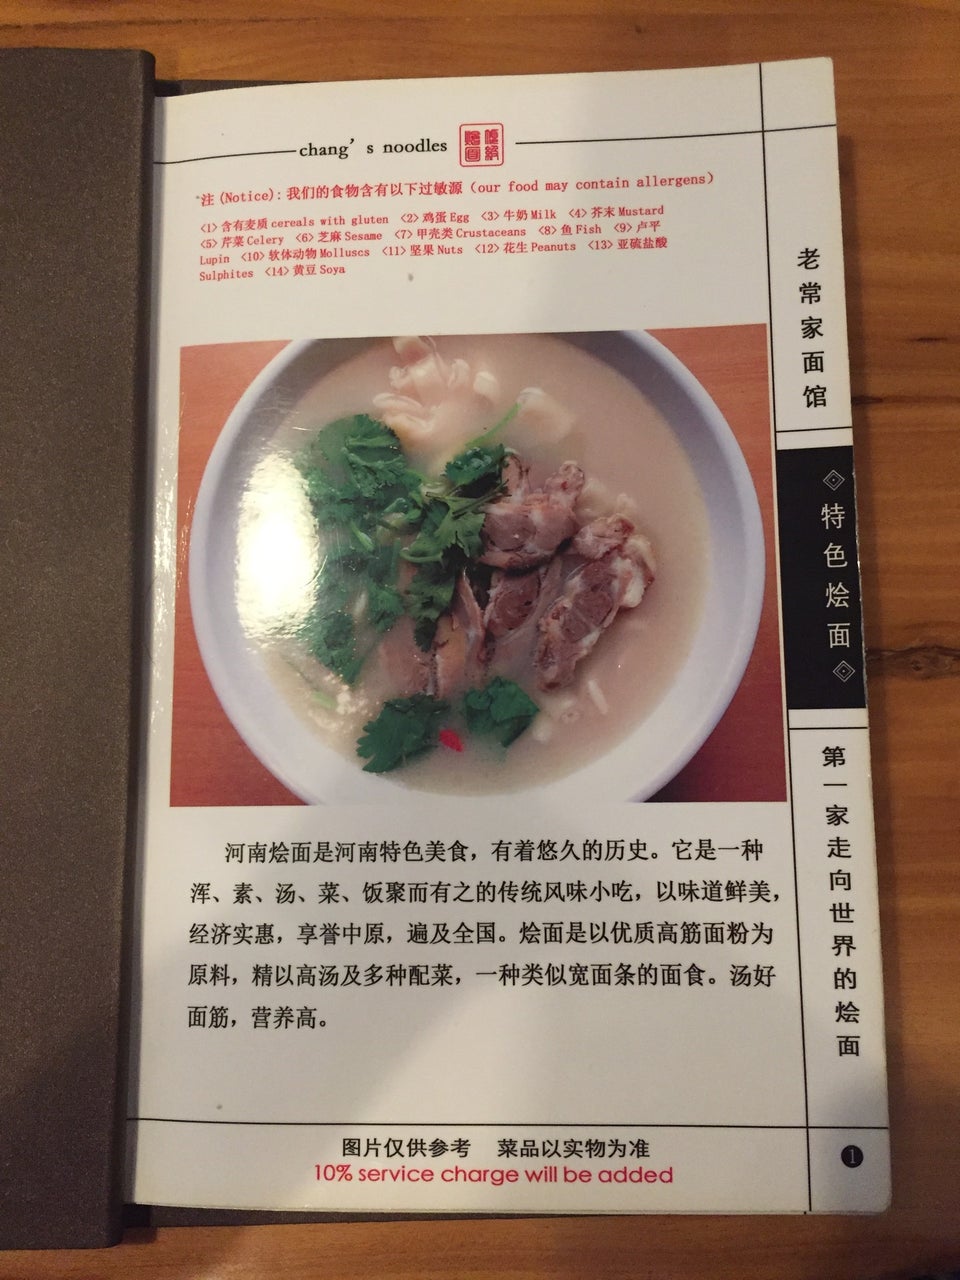 Photo of Chang's Noodle (Lao Chang)